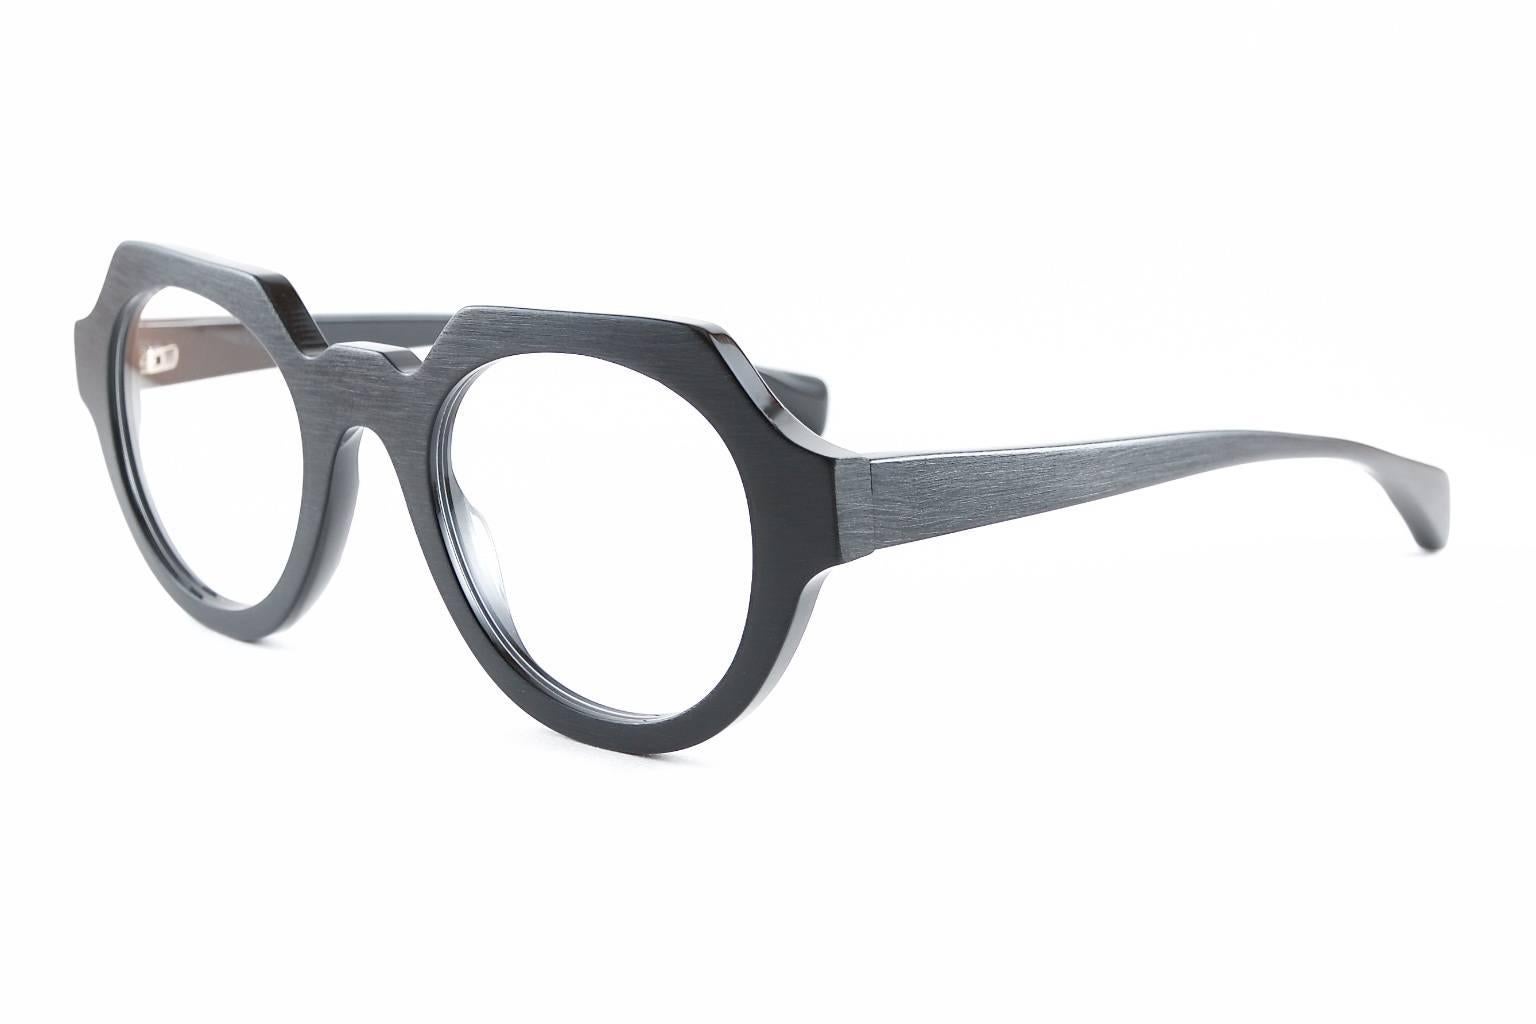 Hotel de Ville proudly presents the Praslin eyeglass frame in black from Jacques Durand. 

_____________________________________________________________
Established in 2005, Hotel de Ville is the premier destination in Los Angeles for vintage and